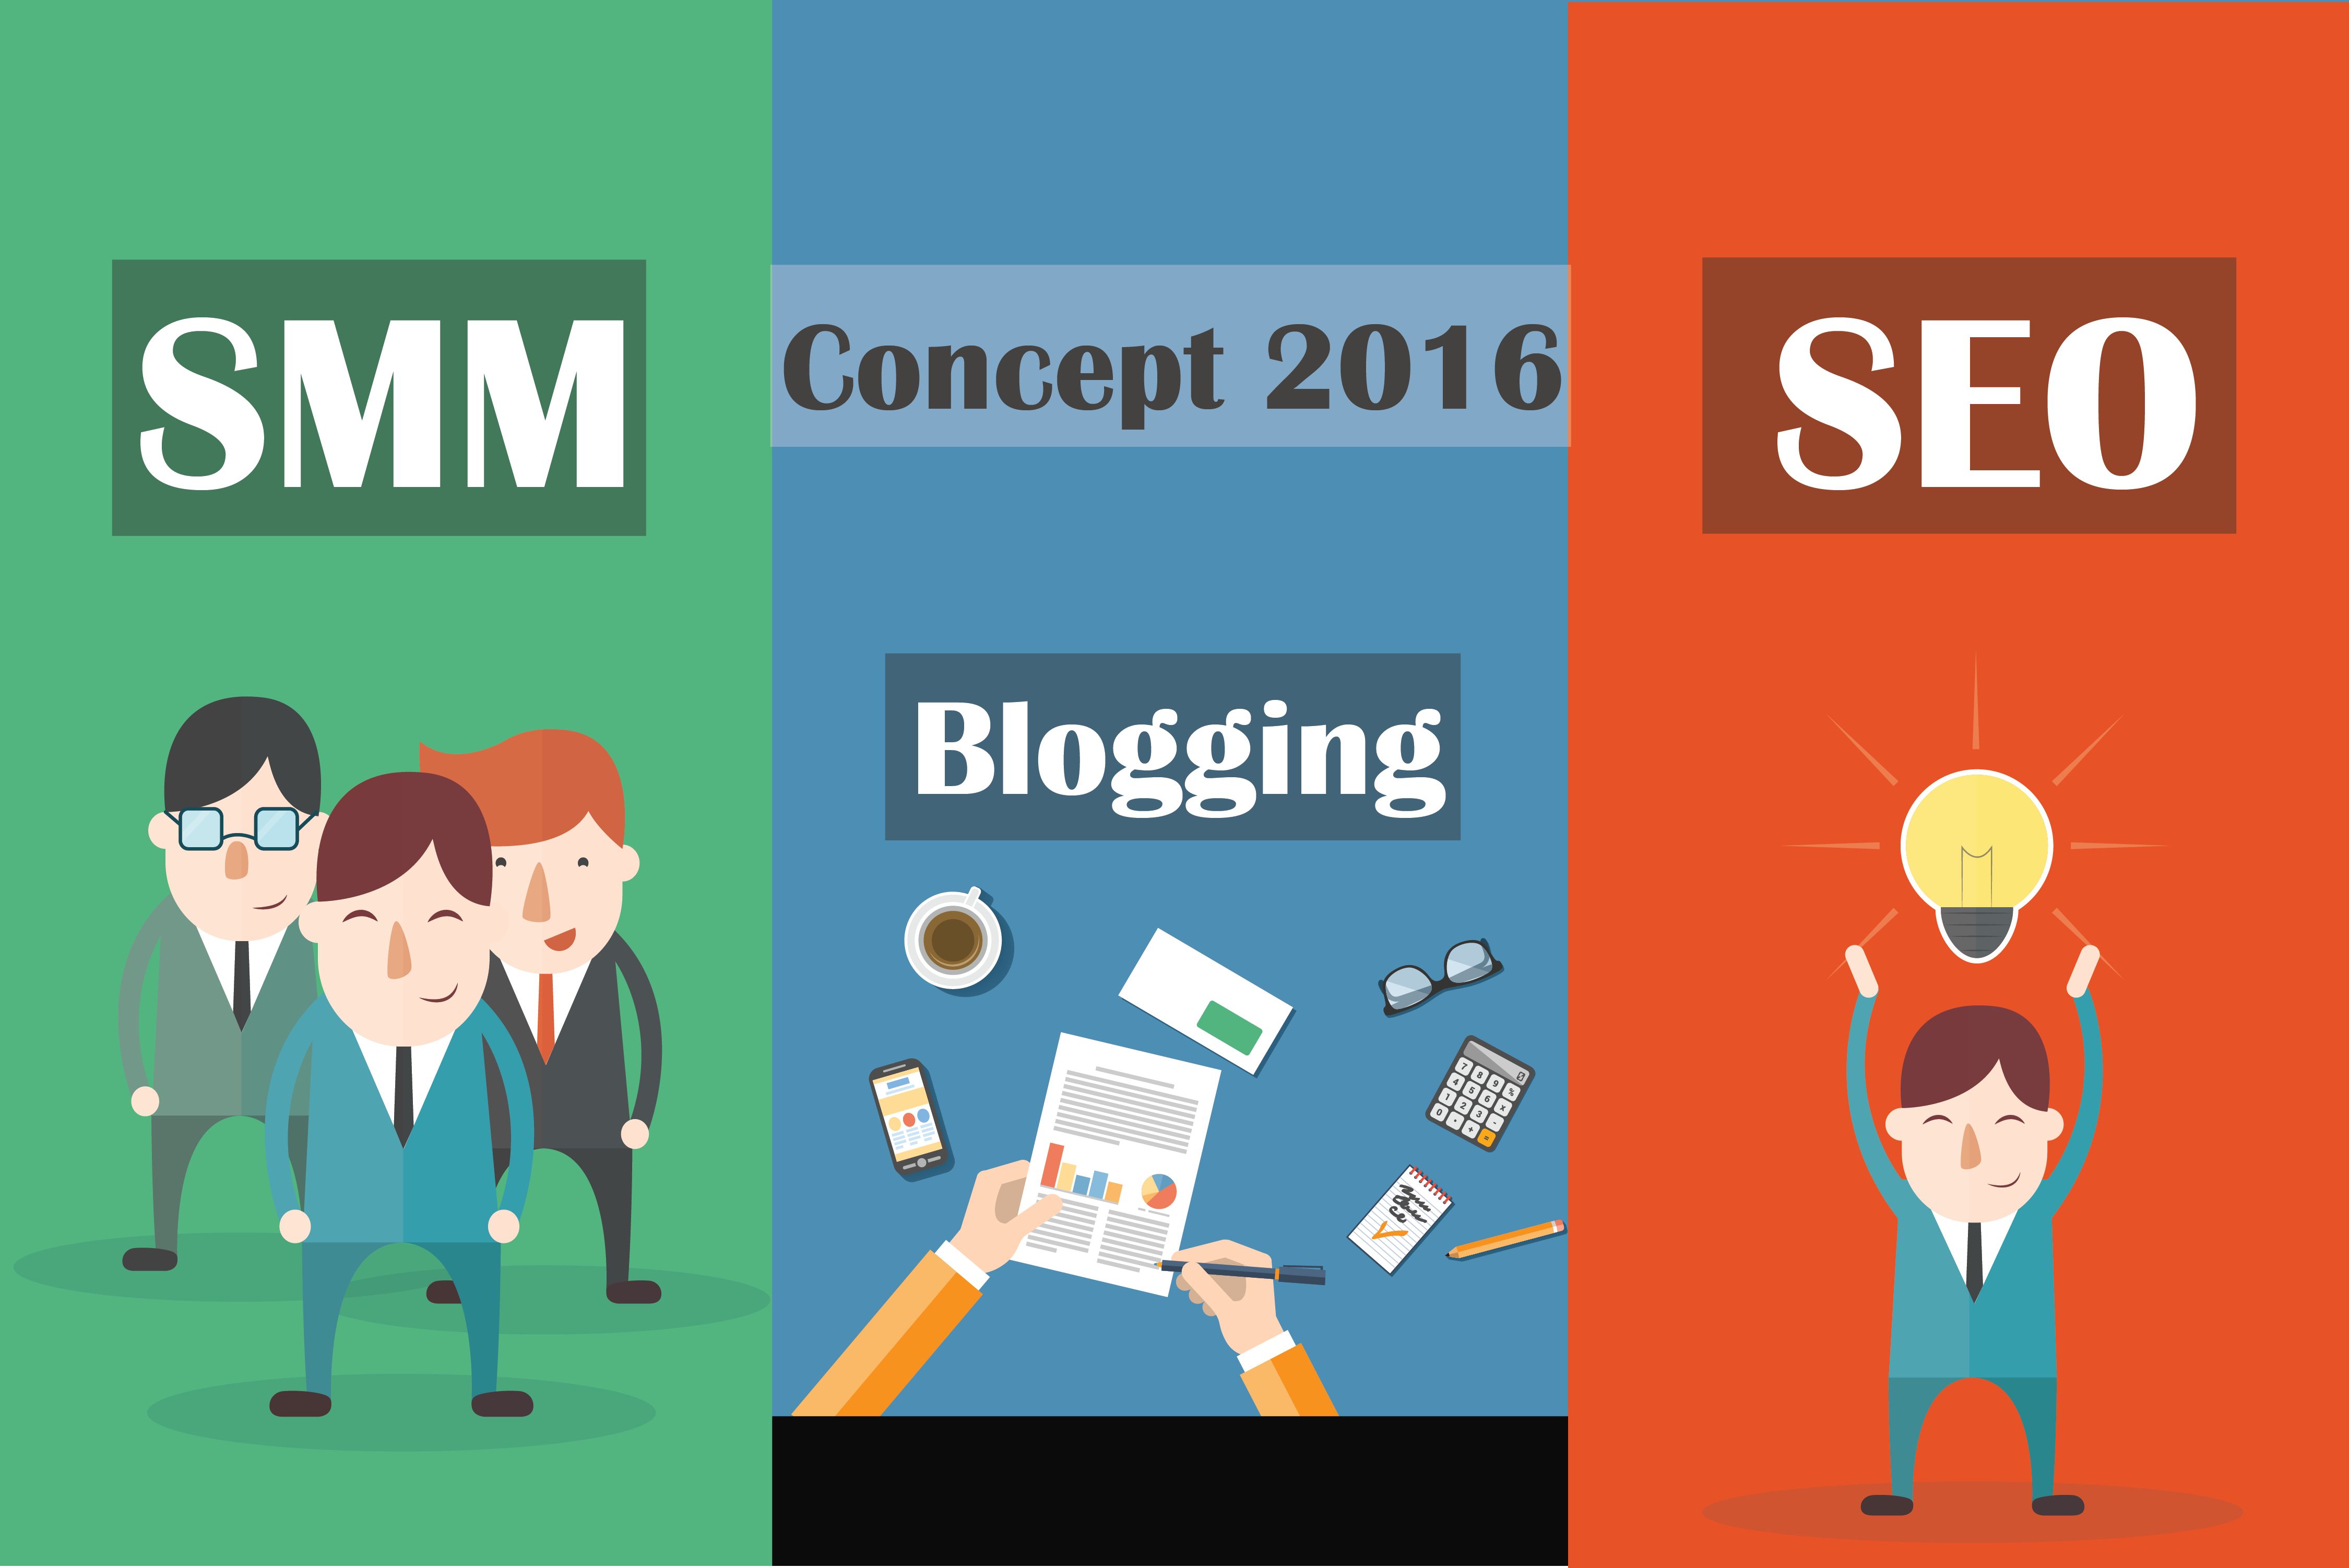 Blogging Concept – How Blogging Would Be in 2016